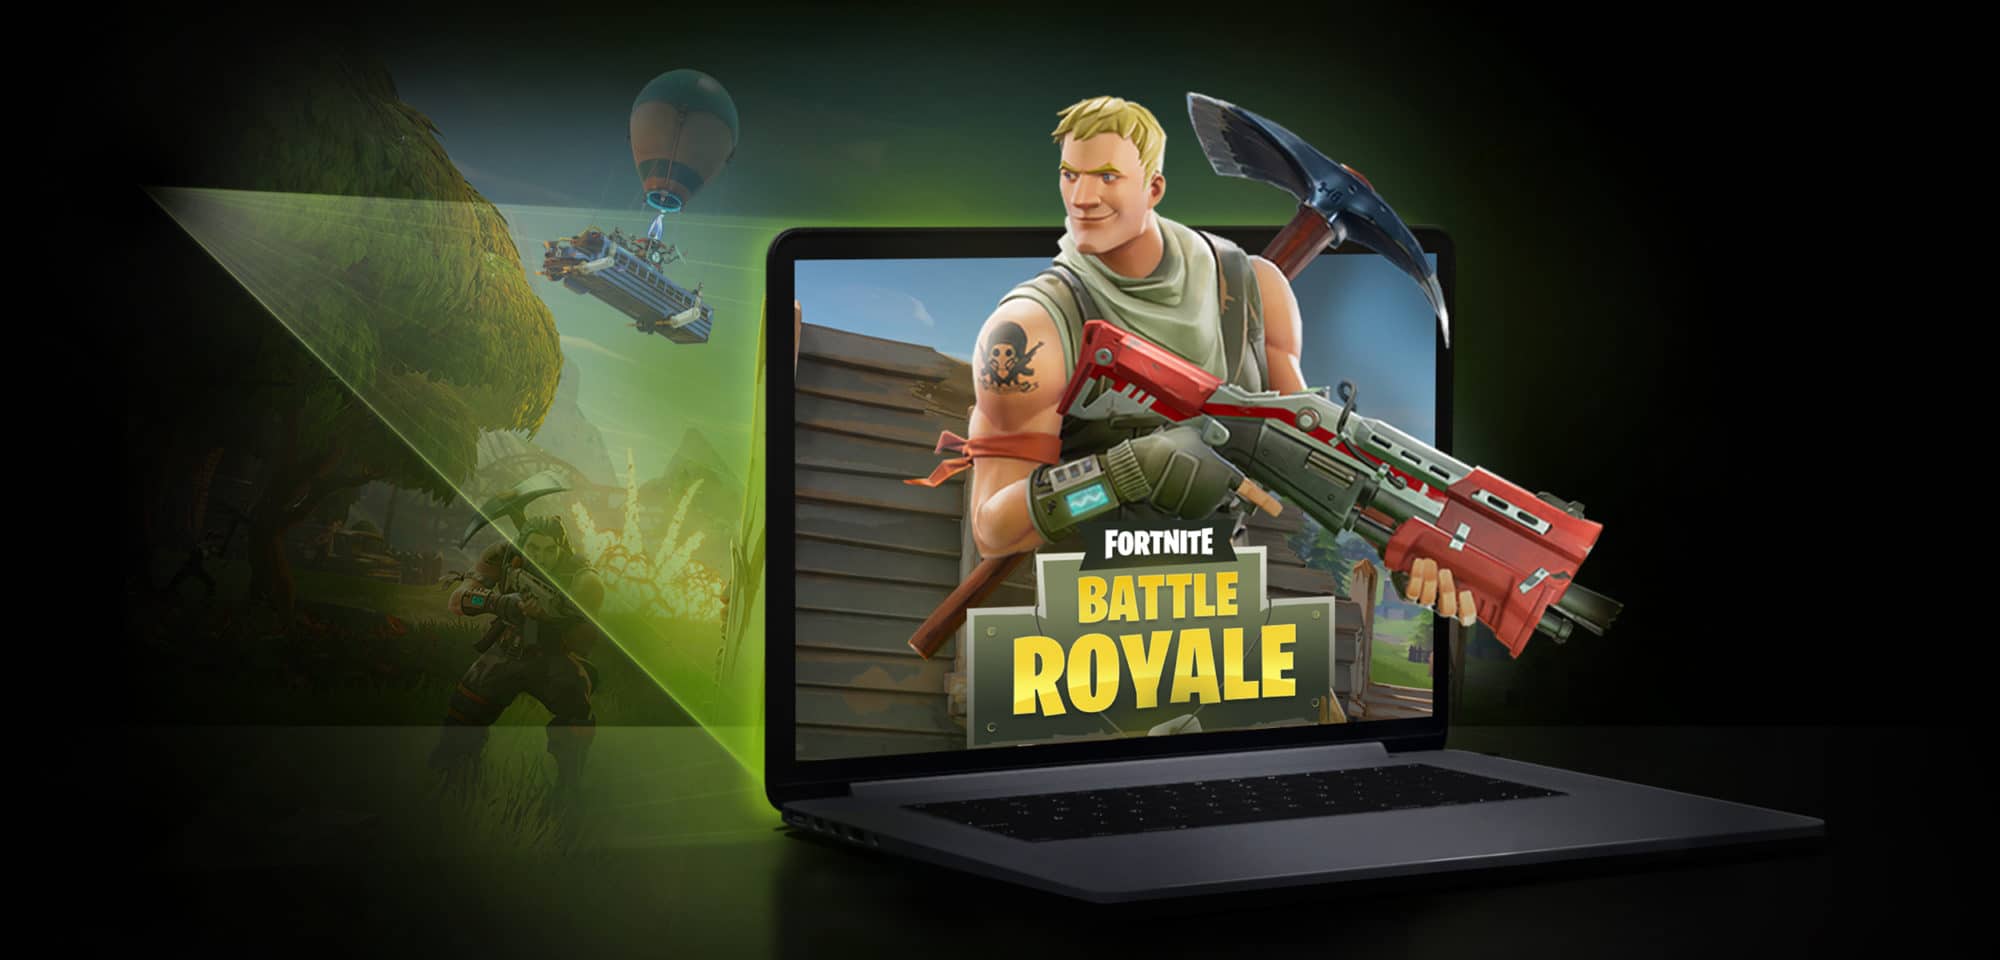 nvidia geforce now download